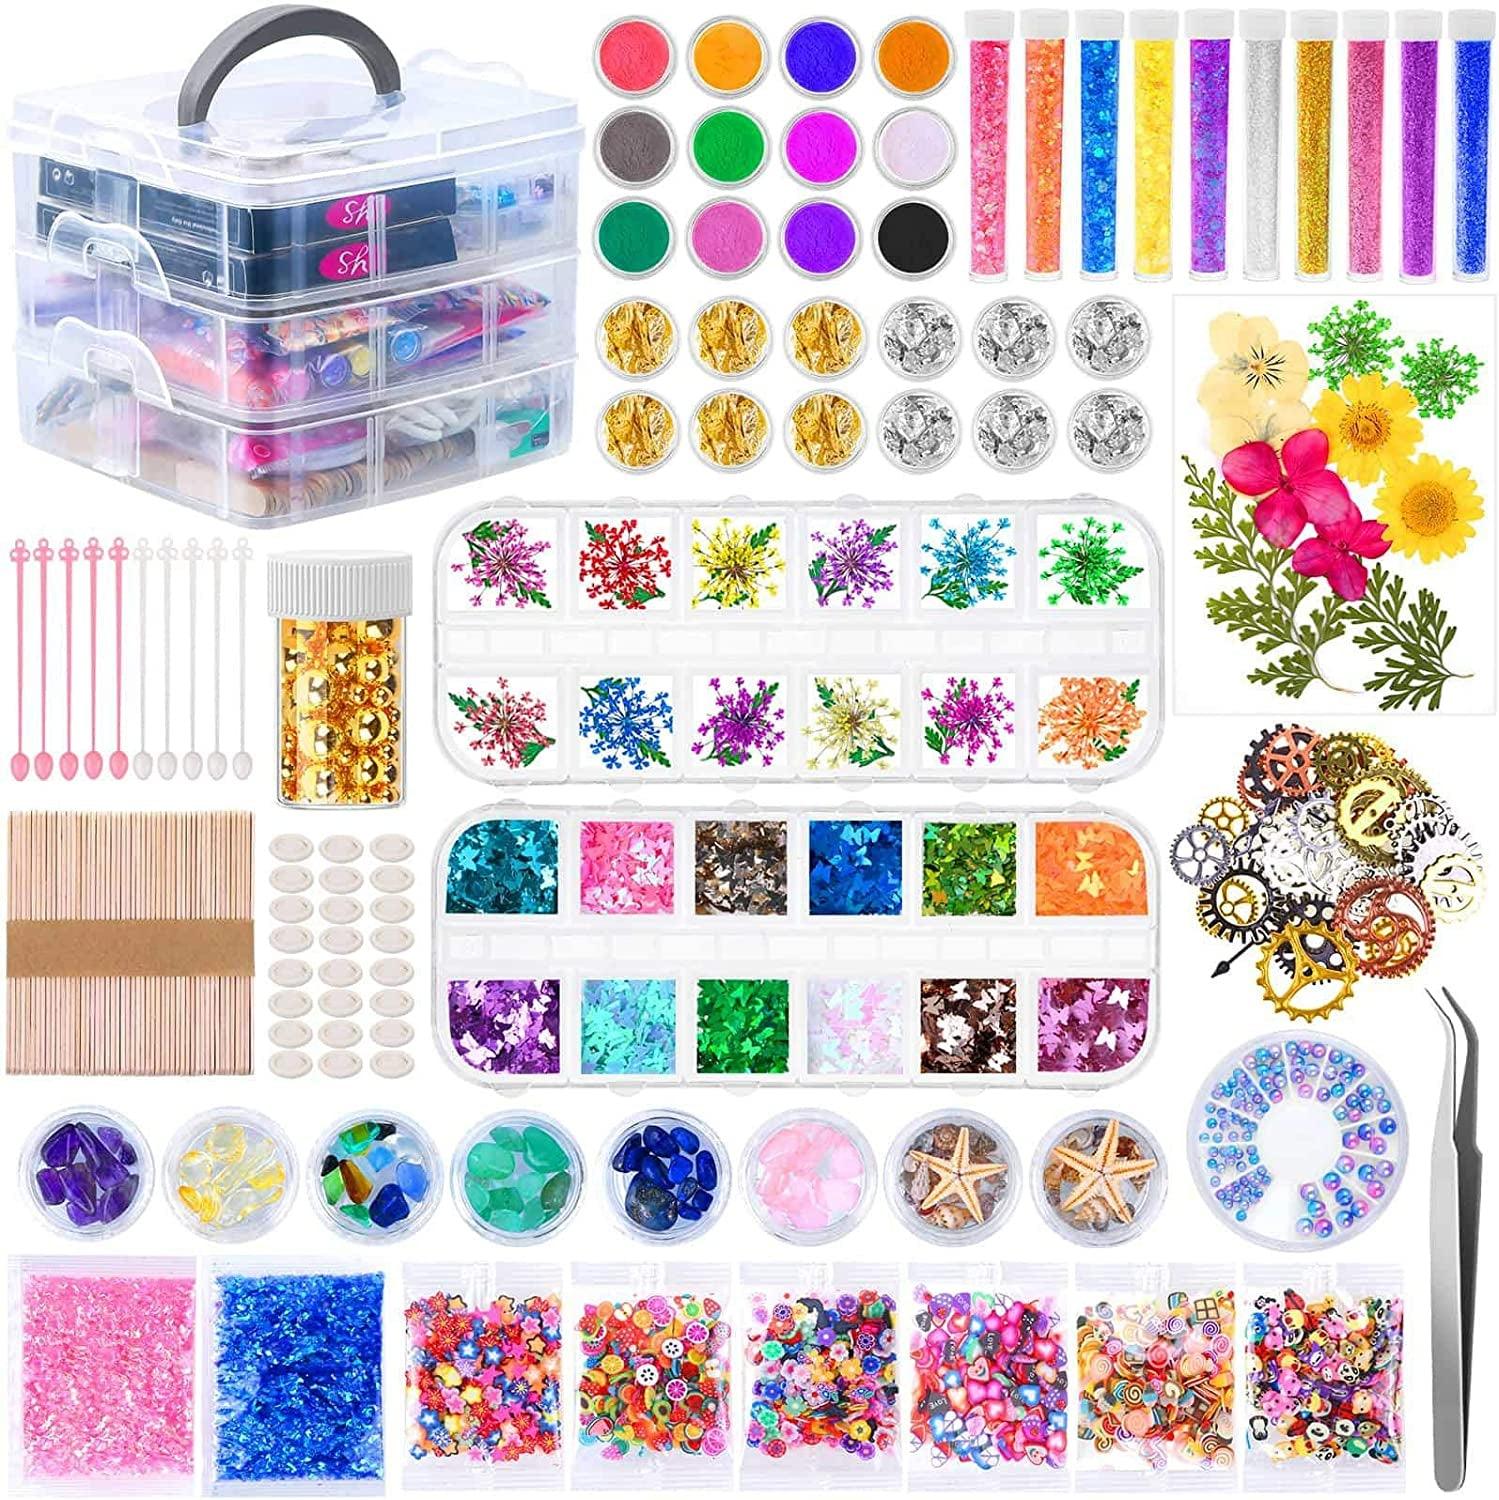 Resin Decoration Accessories Kit, Jewelry Making Supplies with Dried Flowers, Glitter Sequin, Mica Powder, Foil Flakes and Epoxy Fillers for Crafts Beginners - WoodArtSupply